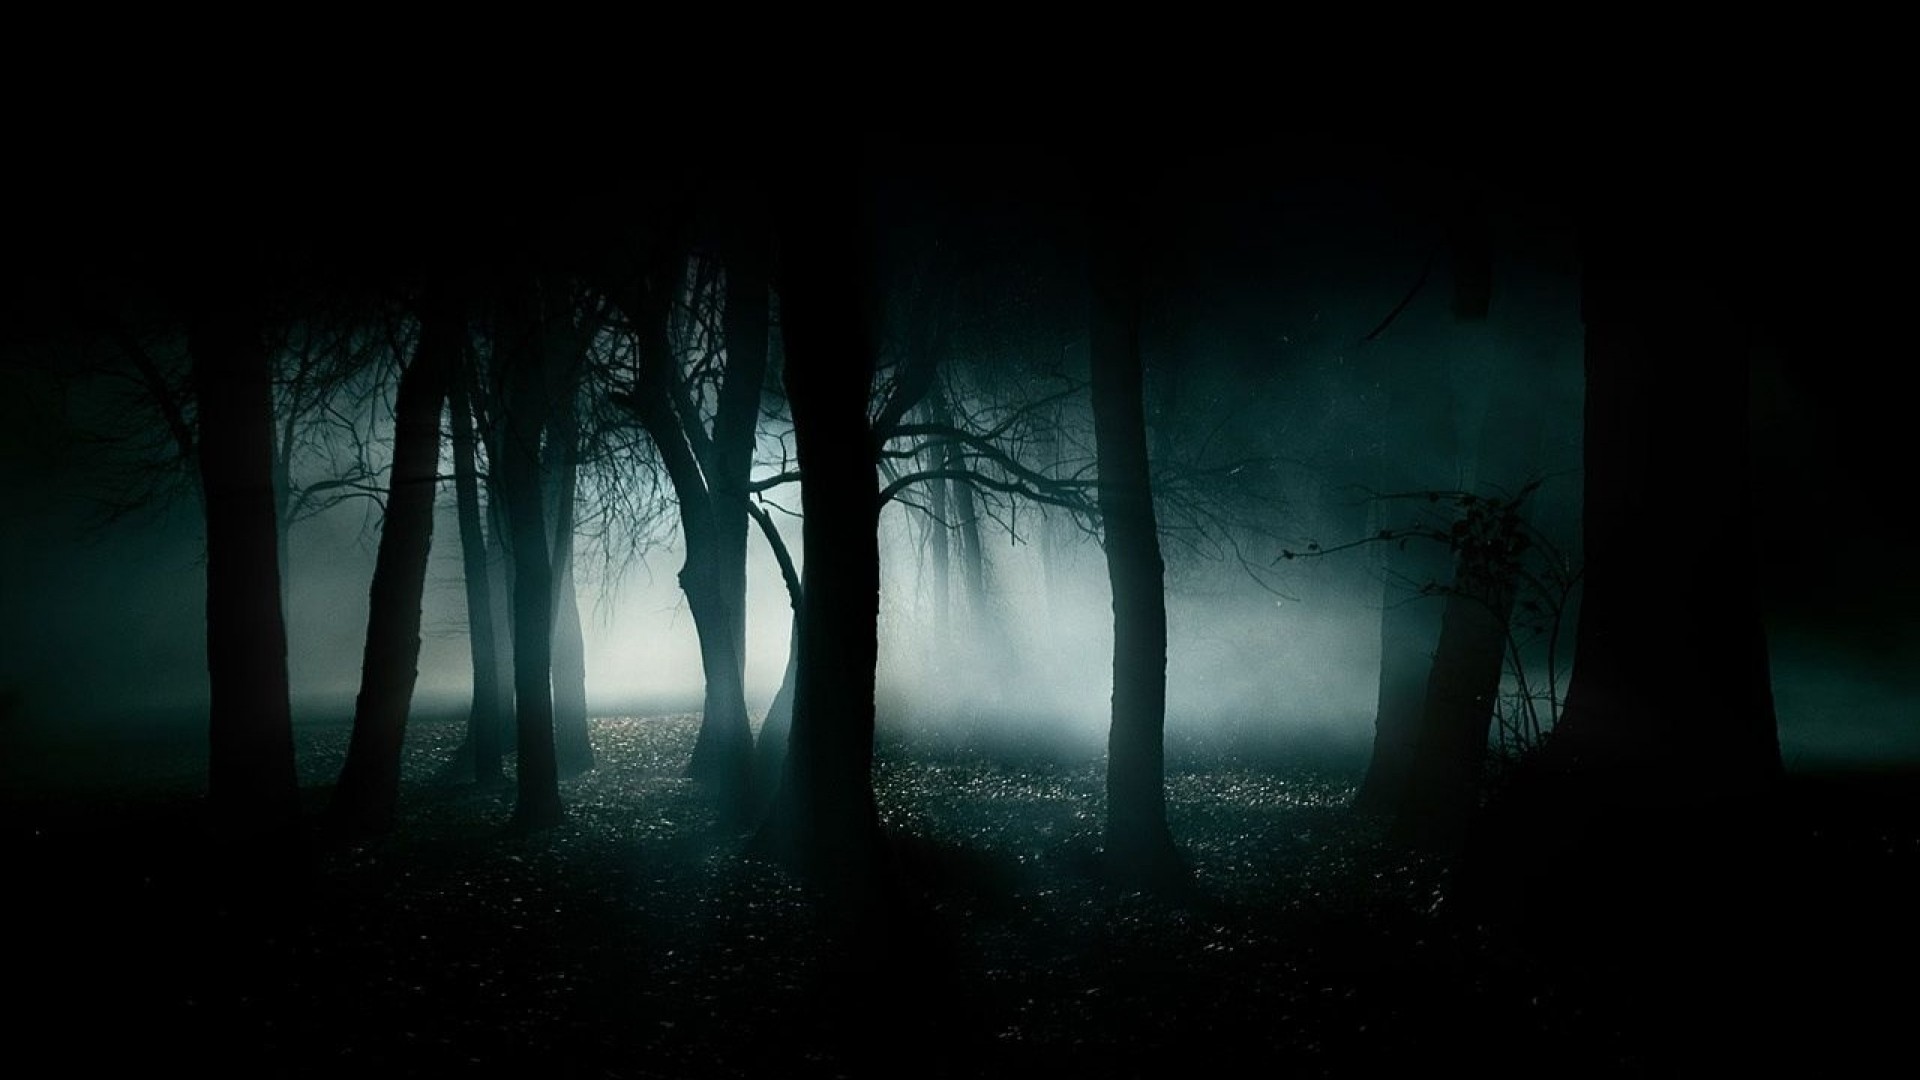 1920x1080 Most Haunting Scary Wallpapers of All TIme 1680Ã1050 Wallpapers Horror  Images (44 Wallpapers